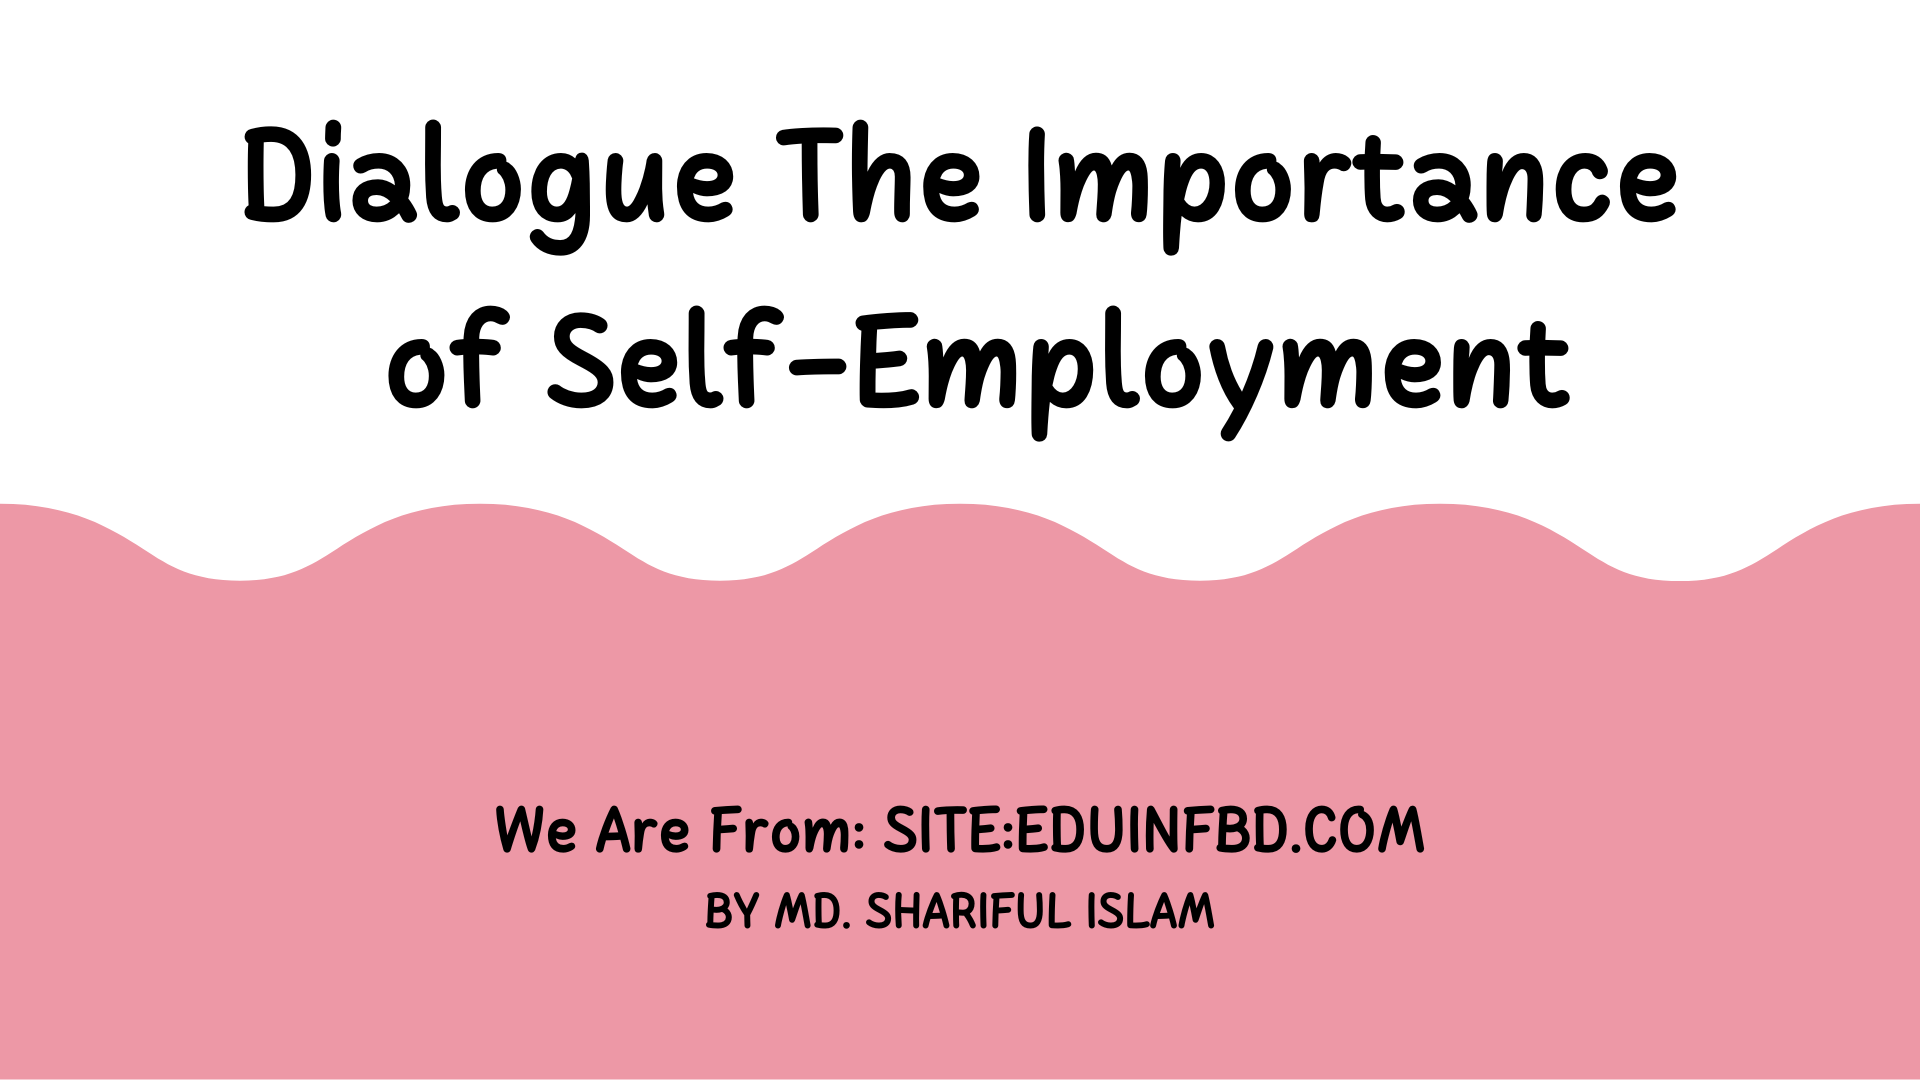 Dialogue The Importance of Self-Employment